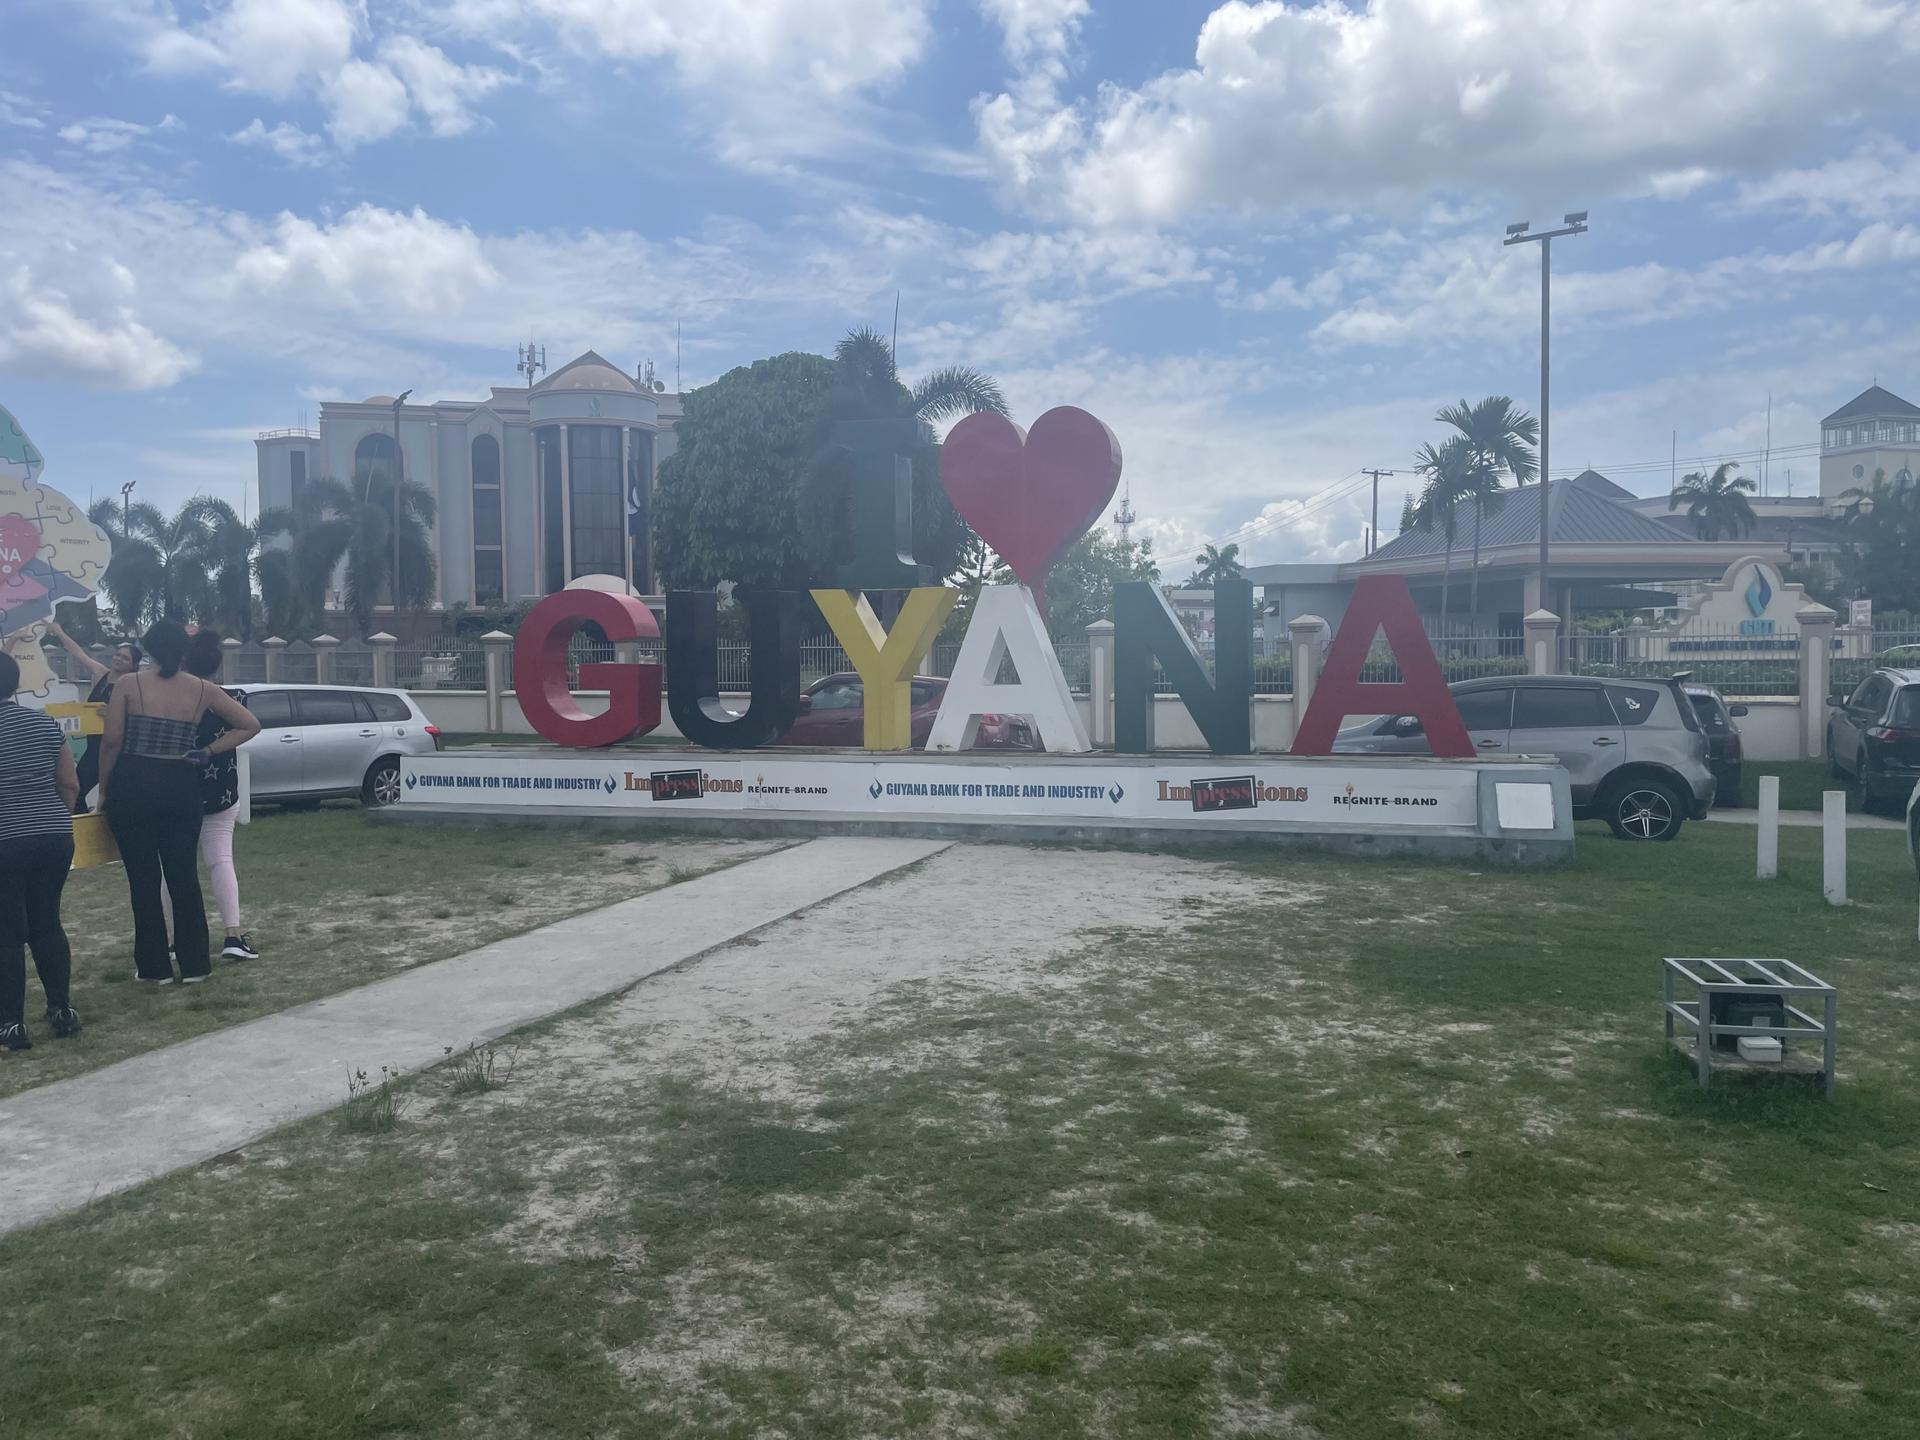 Guyana is hoping that newly discovered offshore crude reserves can help transform the country's economy and offset its ongoing poverty crisis.